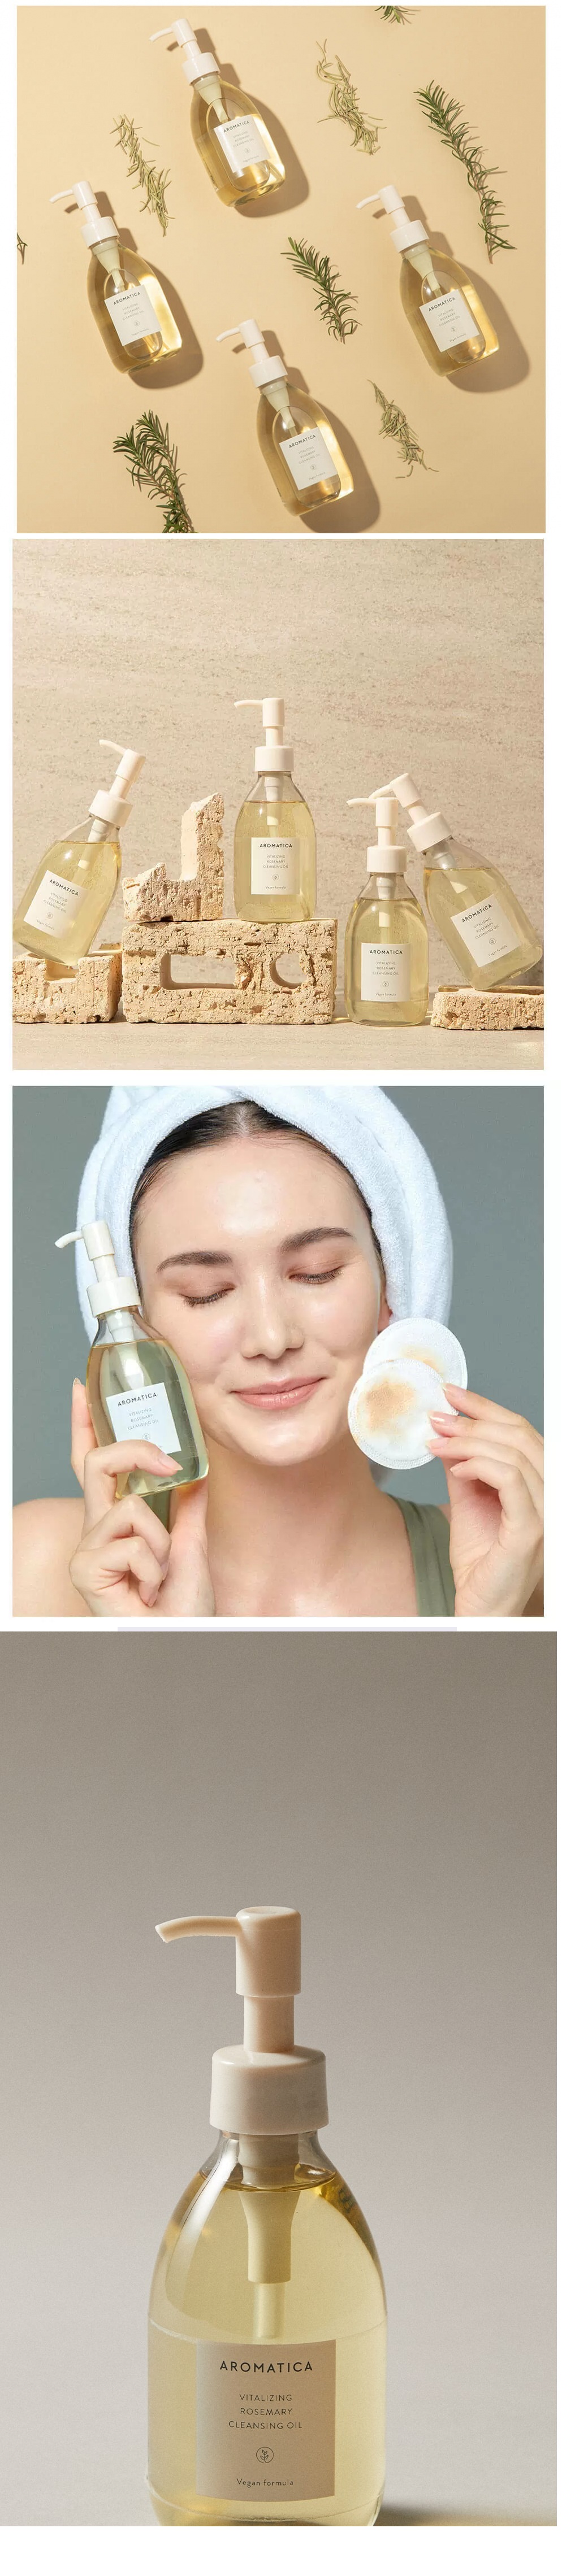 Aromatica Vitalizing Rosemary Cleansing Oil korean skincare product online shop malaysia hong kong canada2